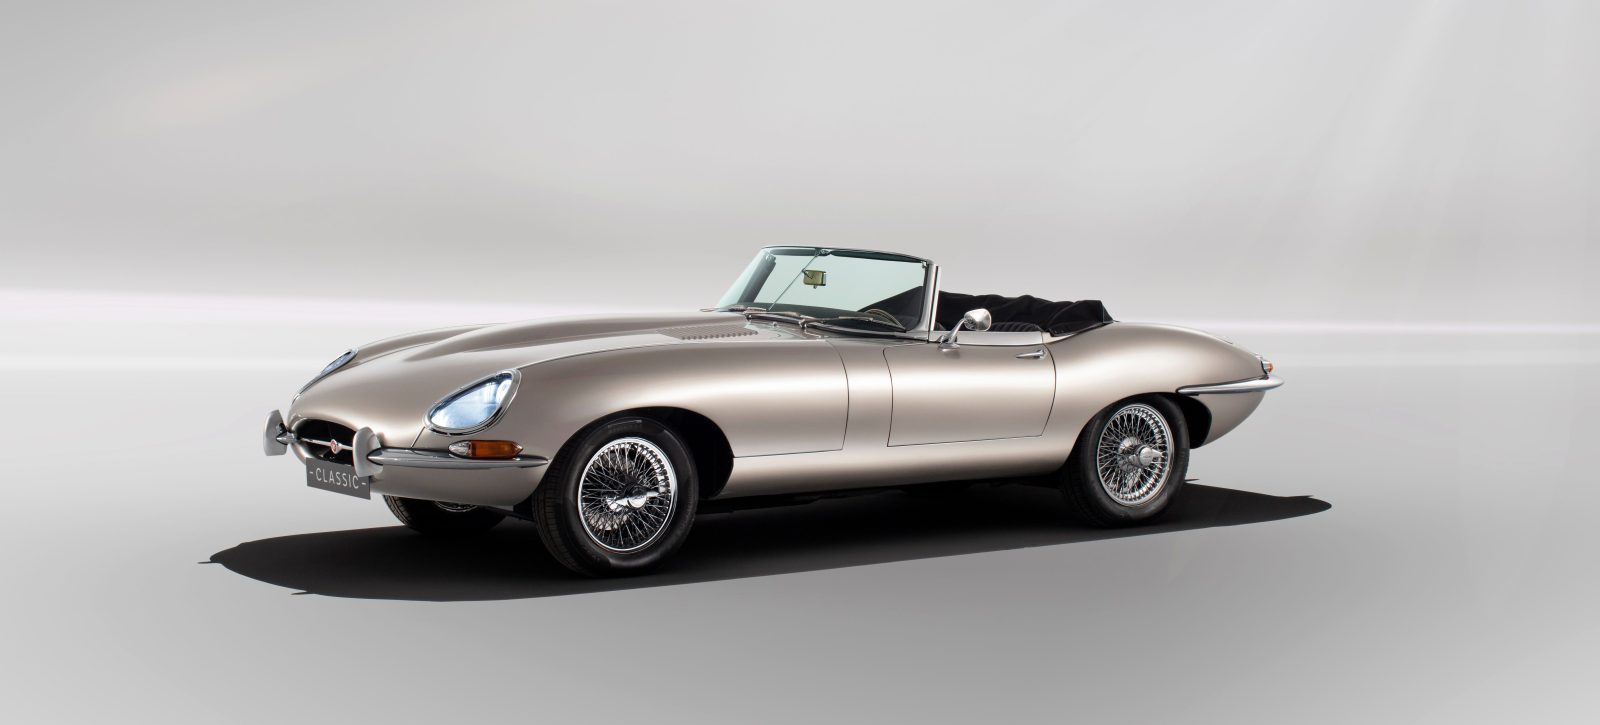 The Jaguar E-Type Zero looks set to be the sexiest electric car yet